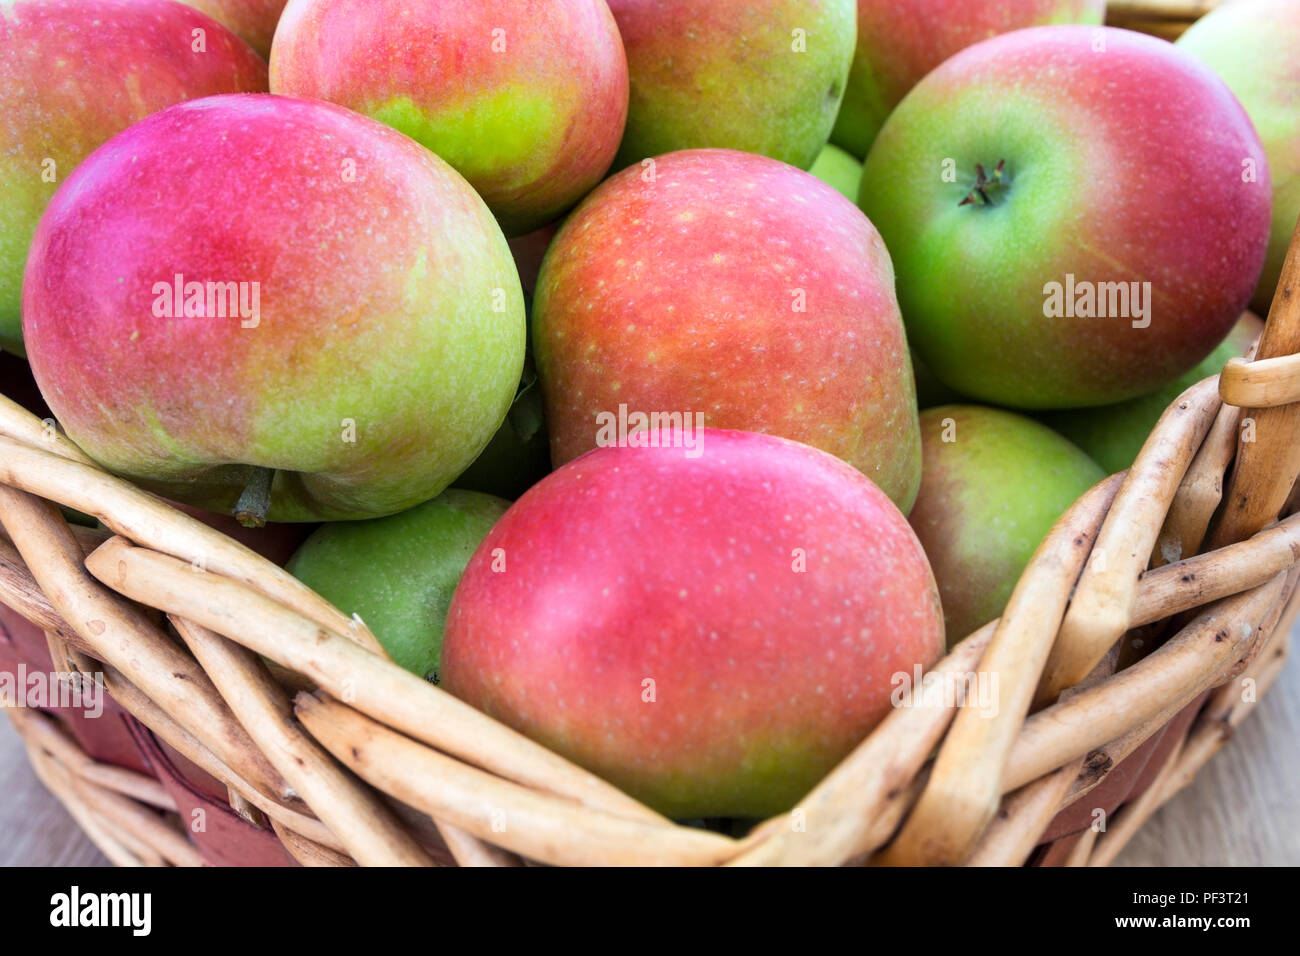 A Freshly Picked Basket of Discovery (Malus domestica) Apples. Stock Photo